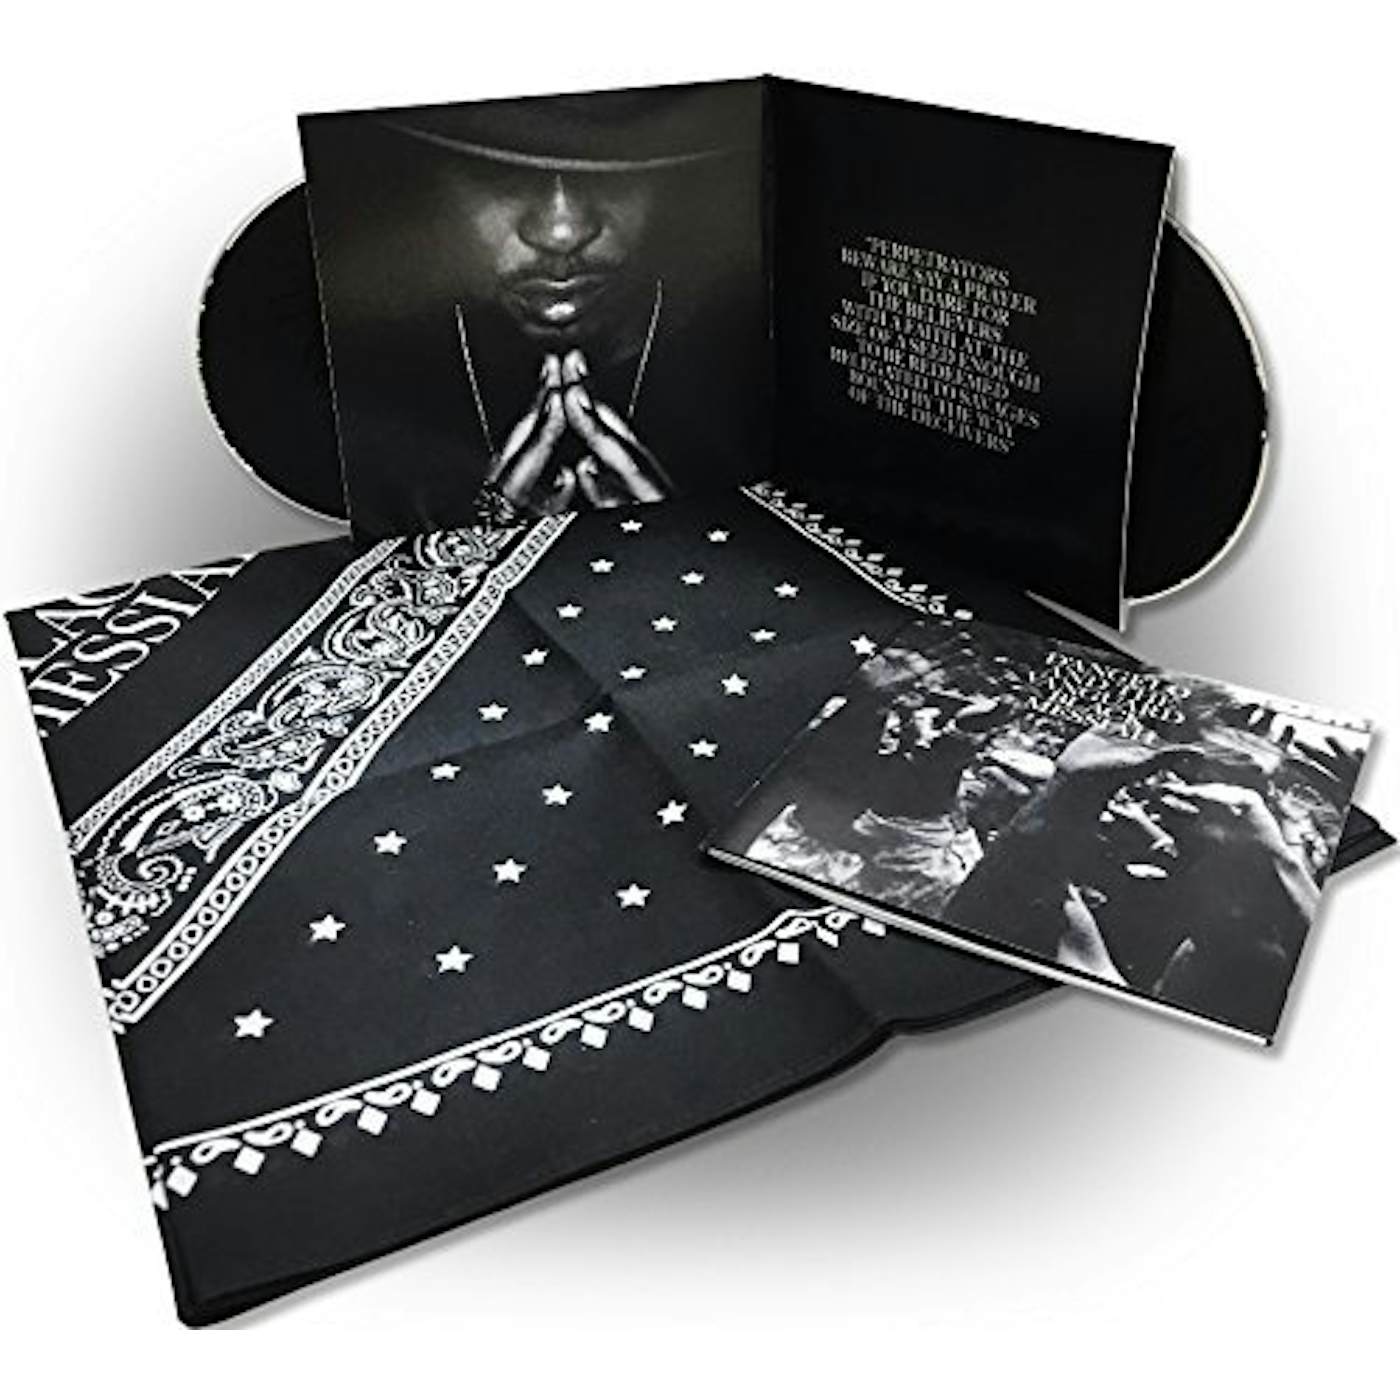 D'Angelo BLACK MESSIAH: SPECIAL EDITION CD